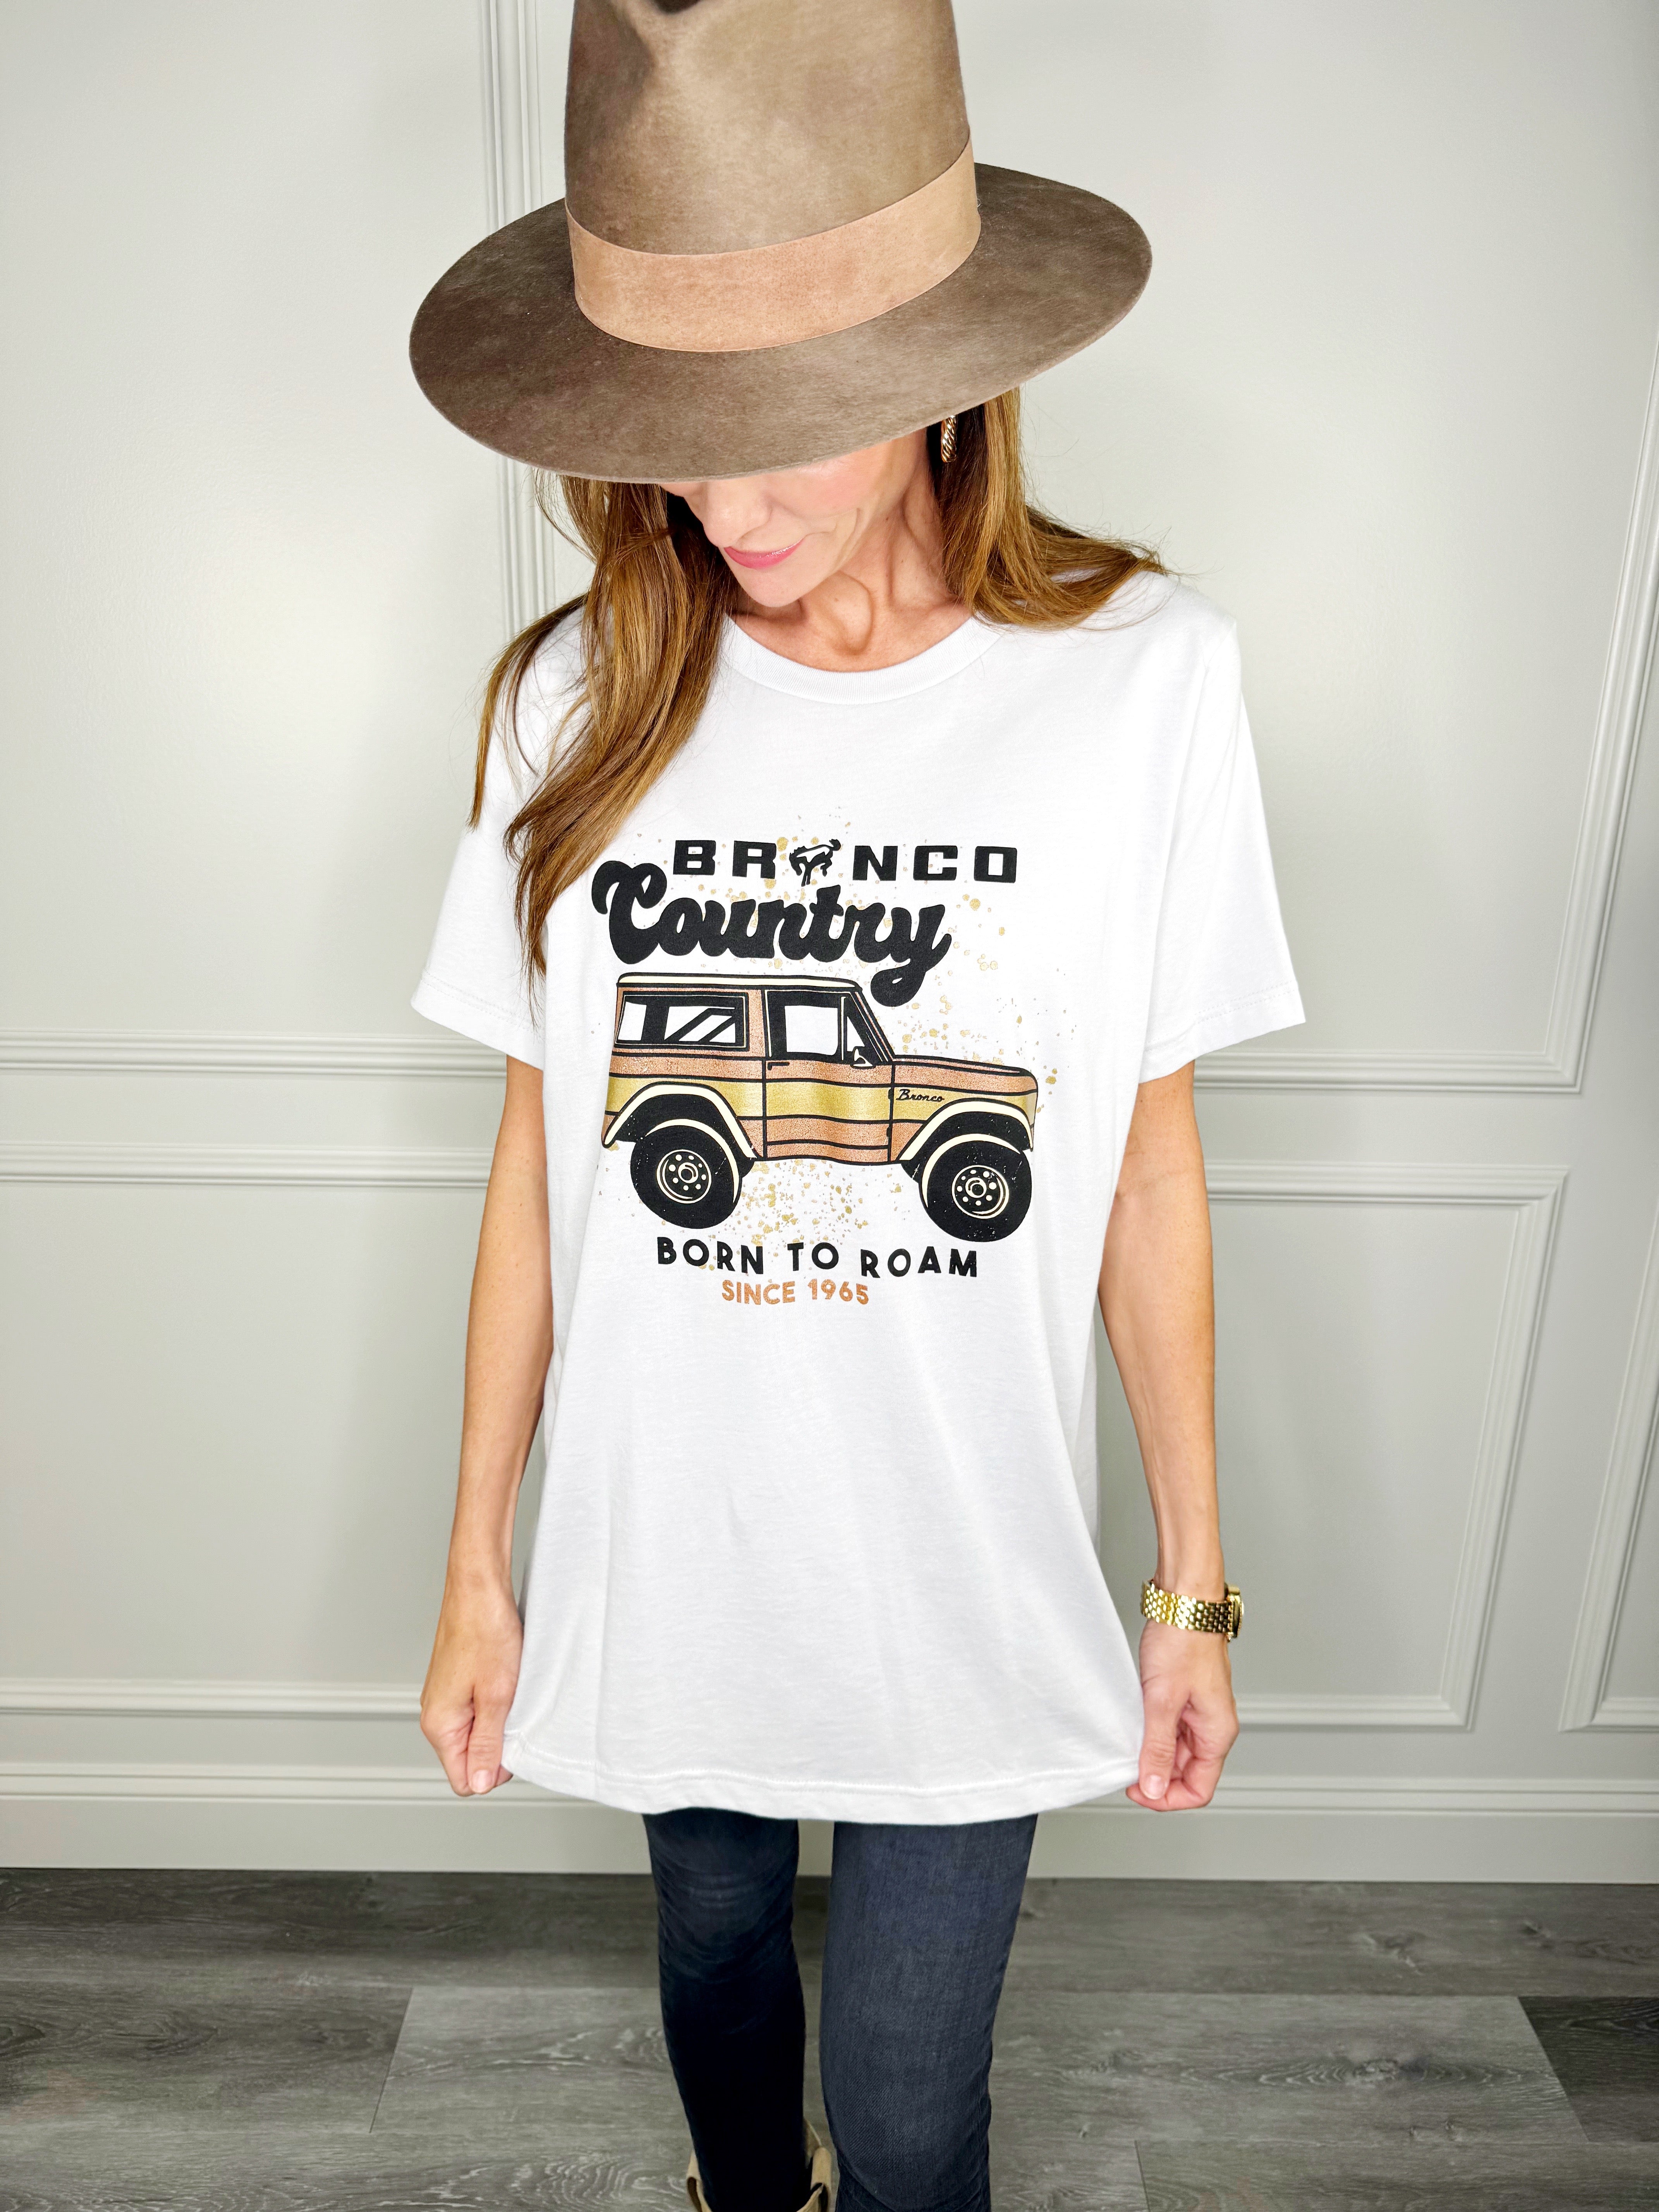 Bronco Country White Tee